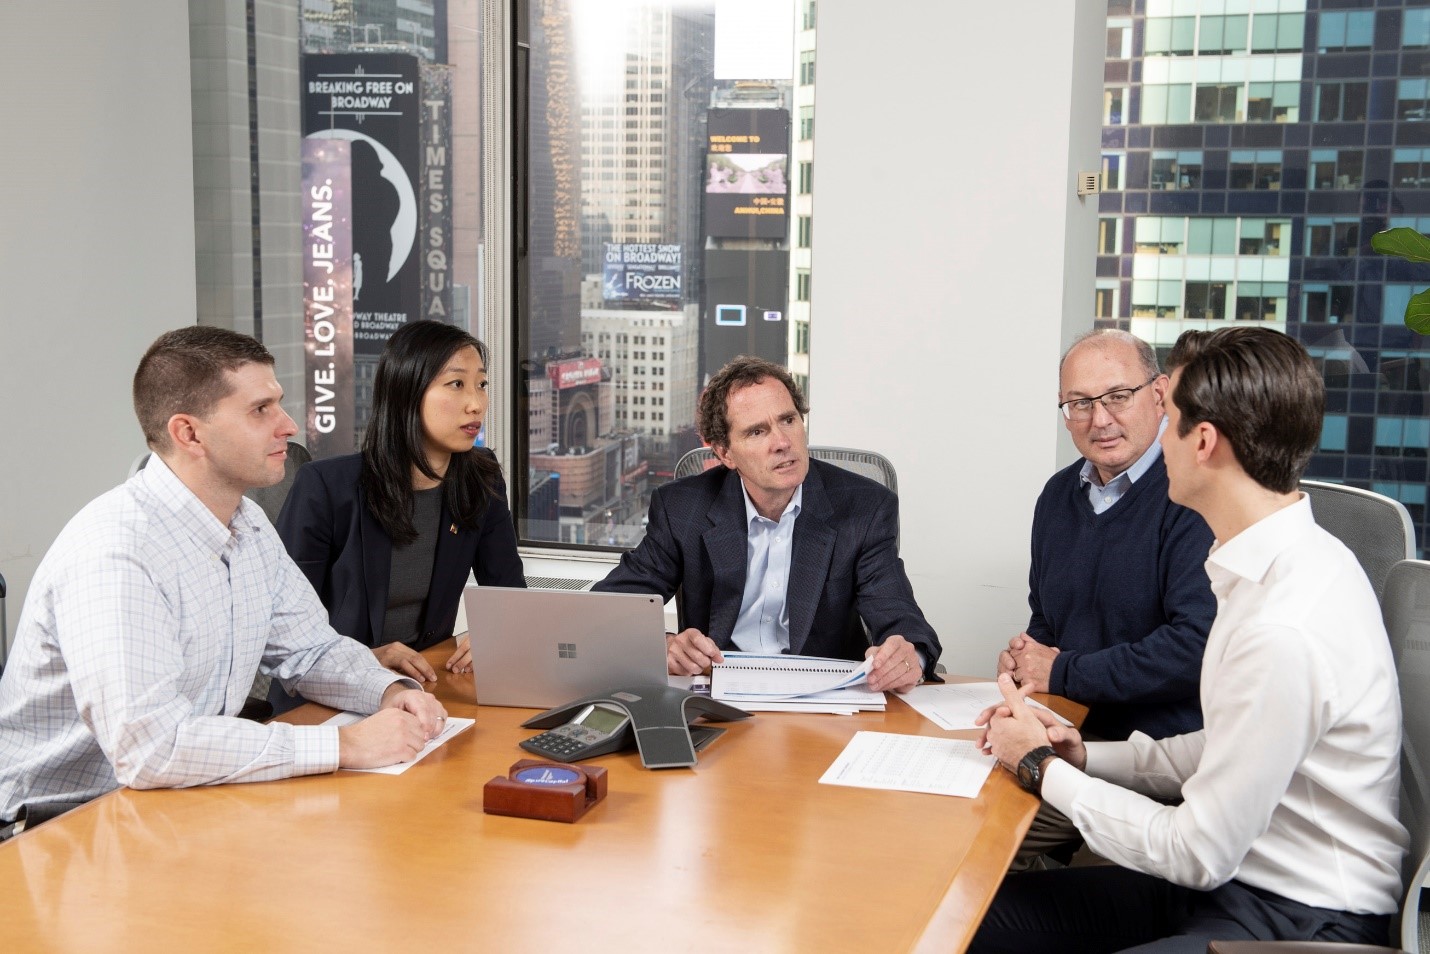 Spire Capital team members meeting in a conference room